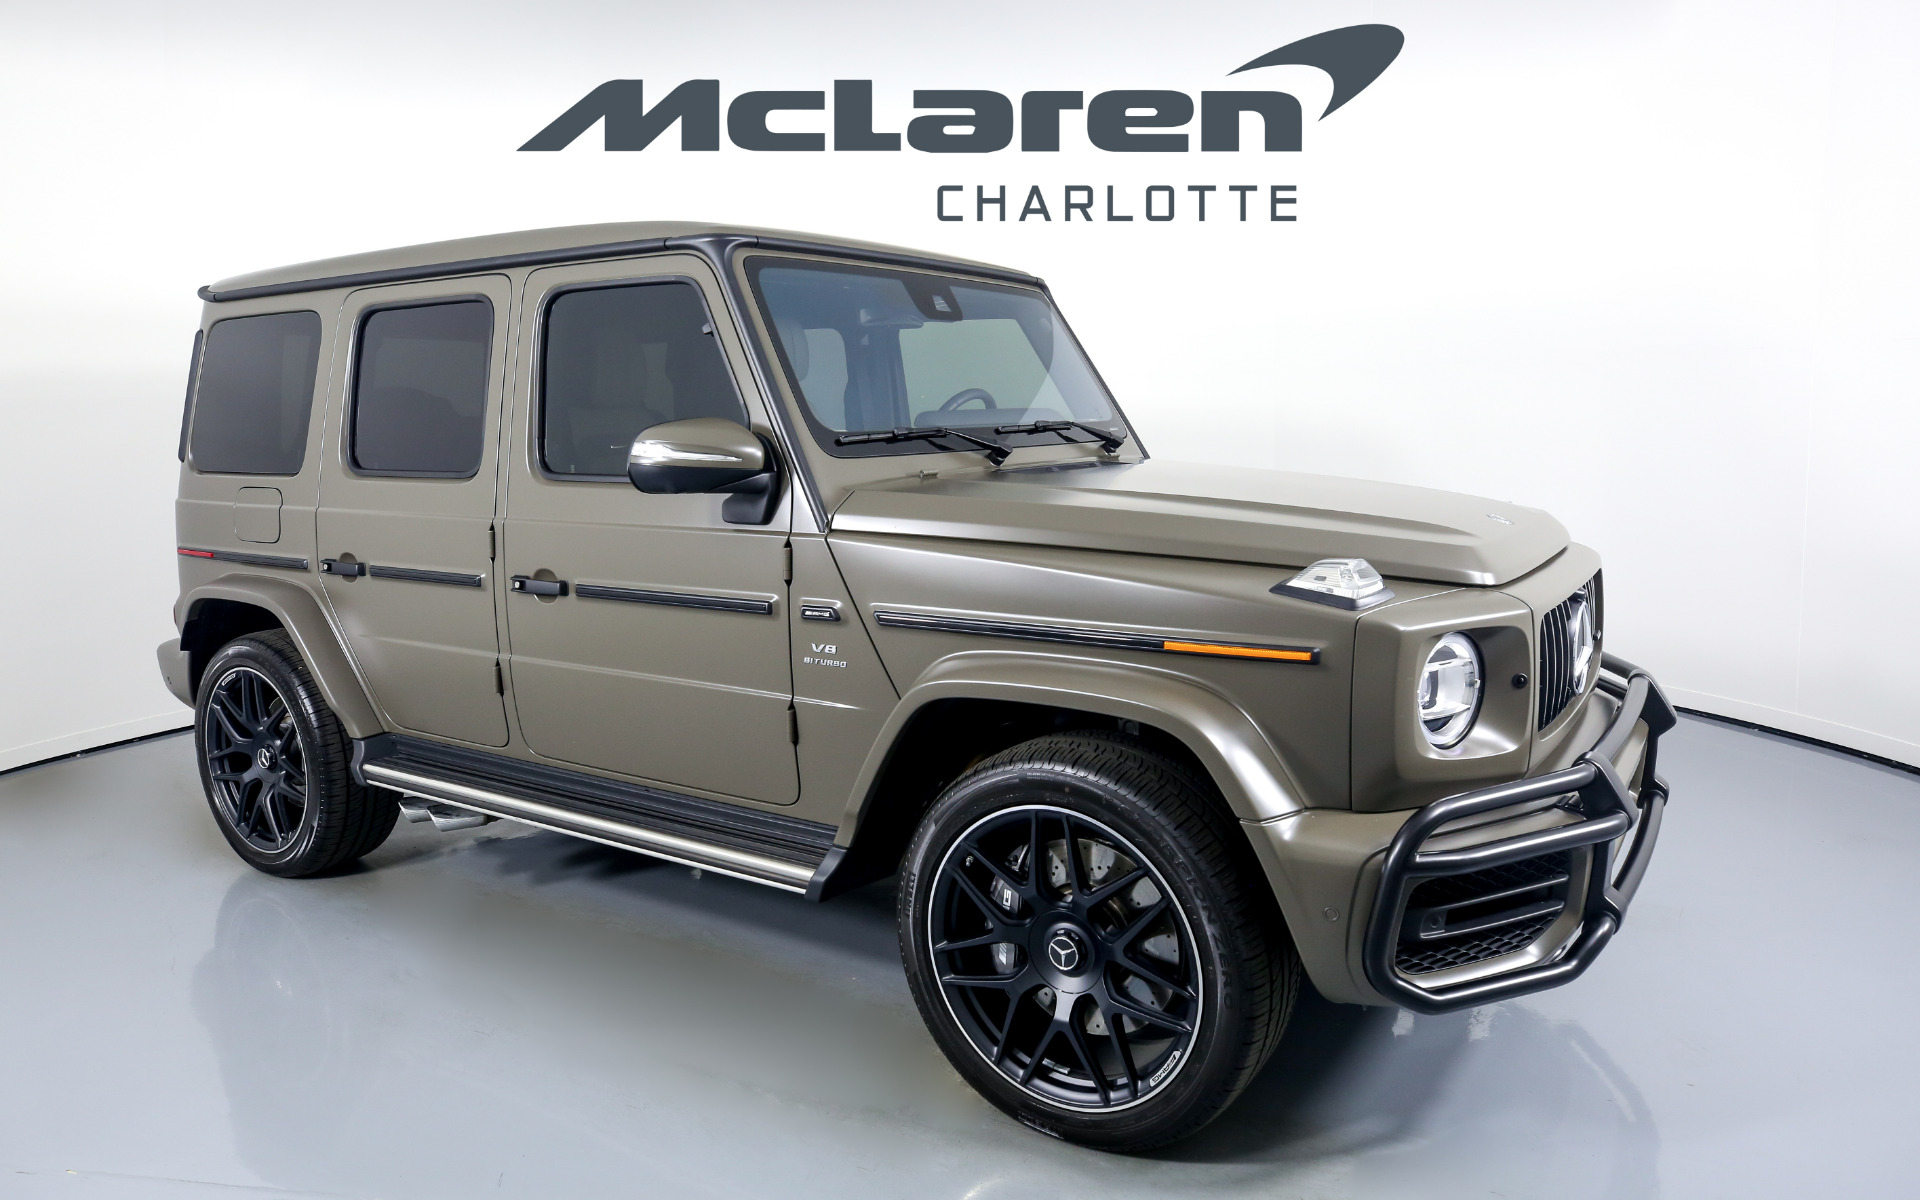 Used 21 Mercedes Benz G Class Amg G 63 For Sale 259 996 Mclaren Charlotte Stock